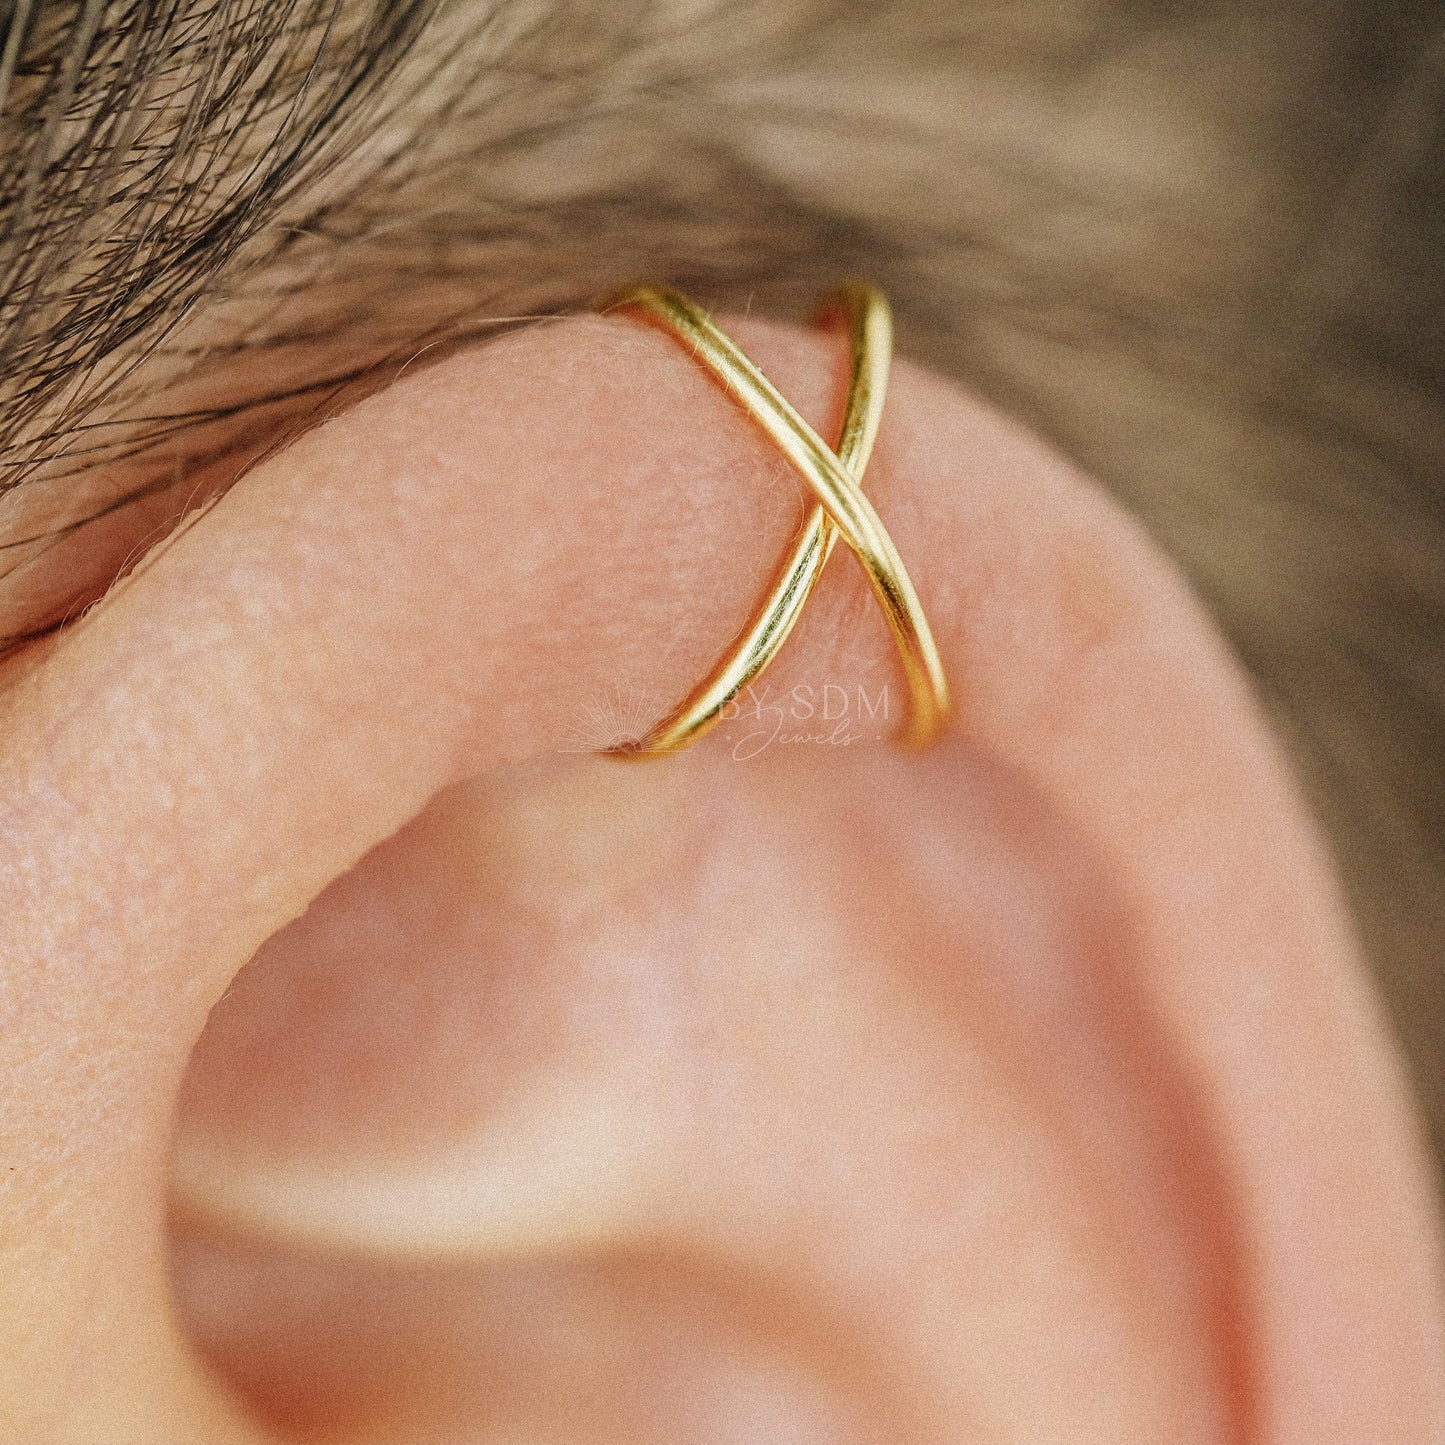 Tiny Thin Criss Cross Helix Cuff • Upper Ear Cuff • No Piercing is Needed • Gold • Silver • Rose Gold • BYSDMJEWELS